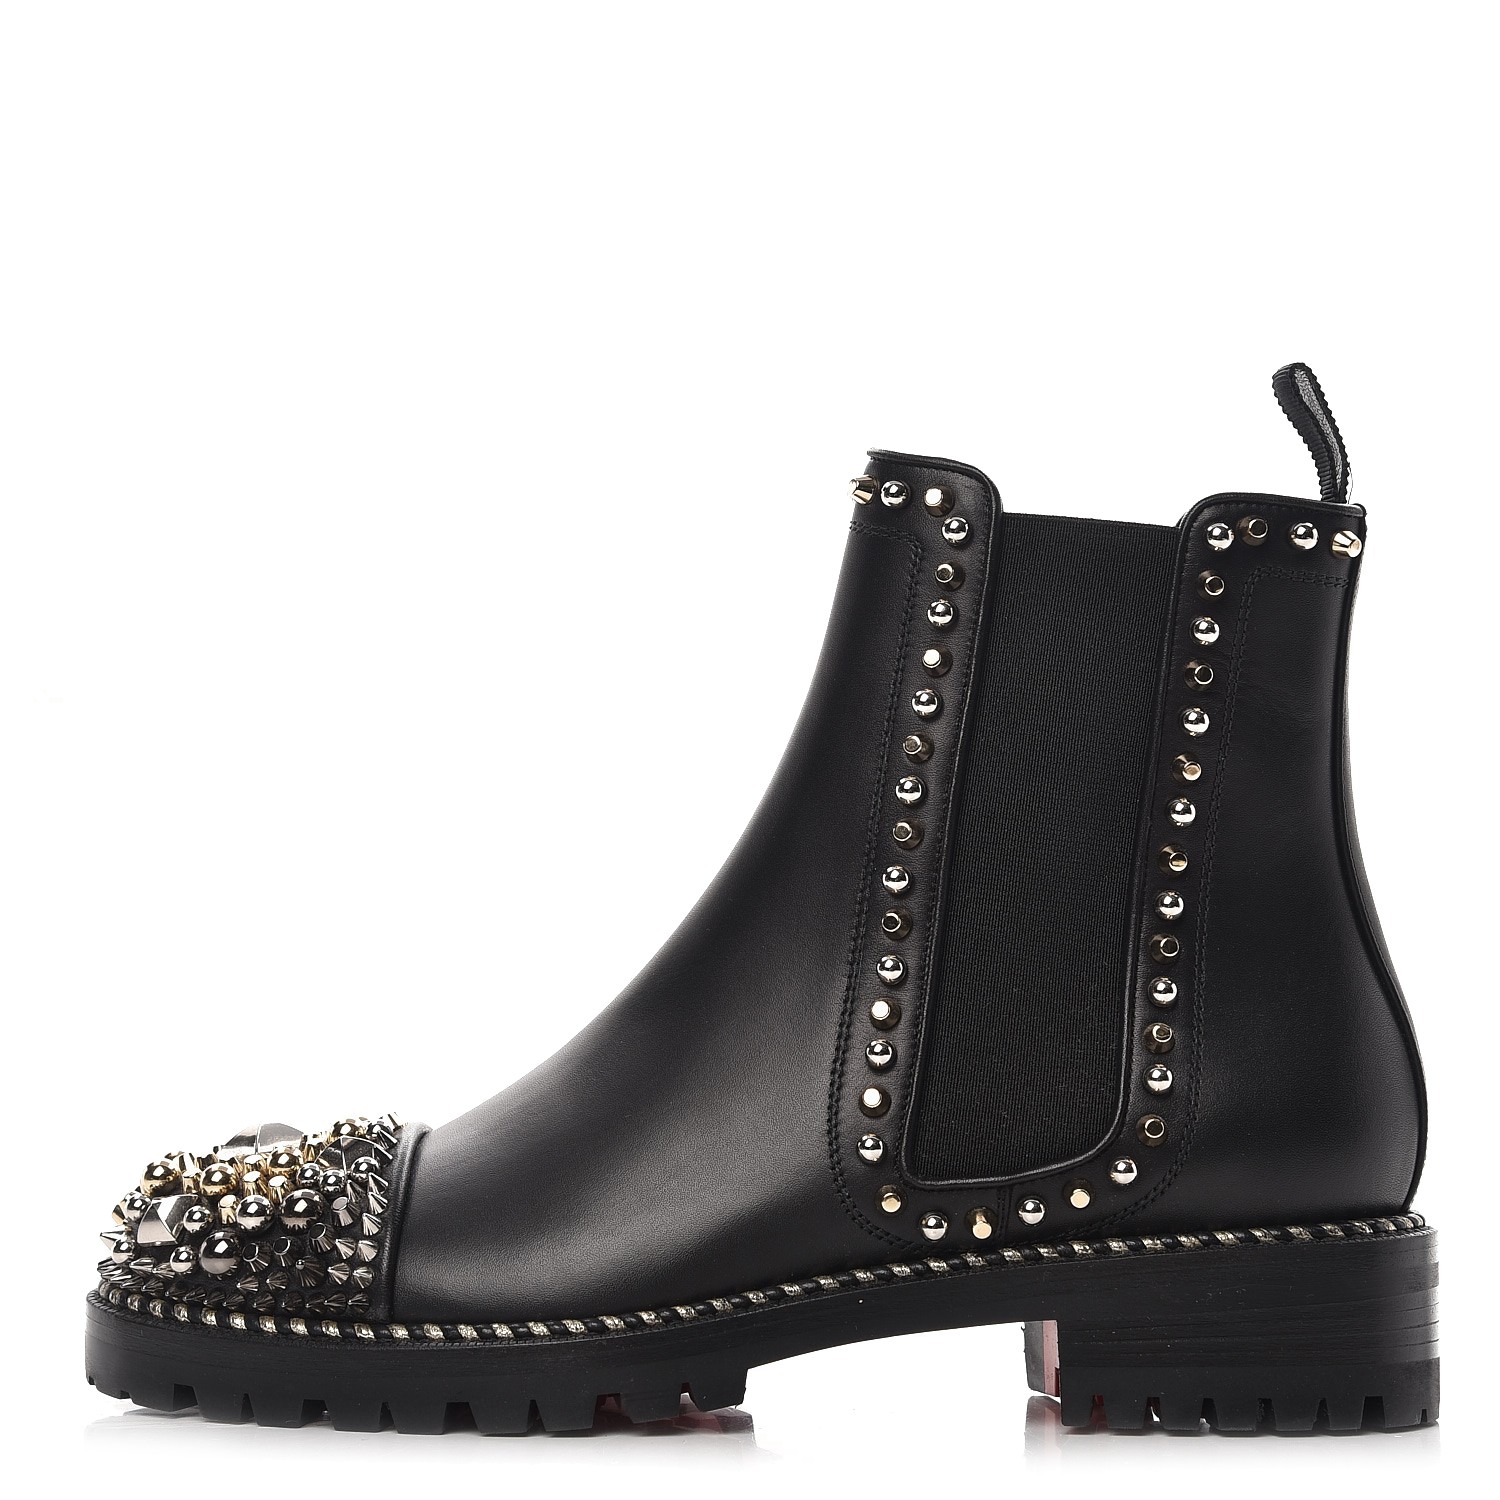 boots with spikes on toe